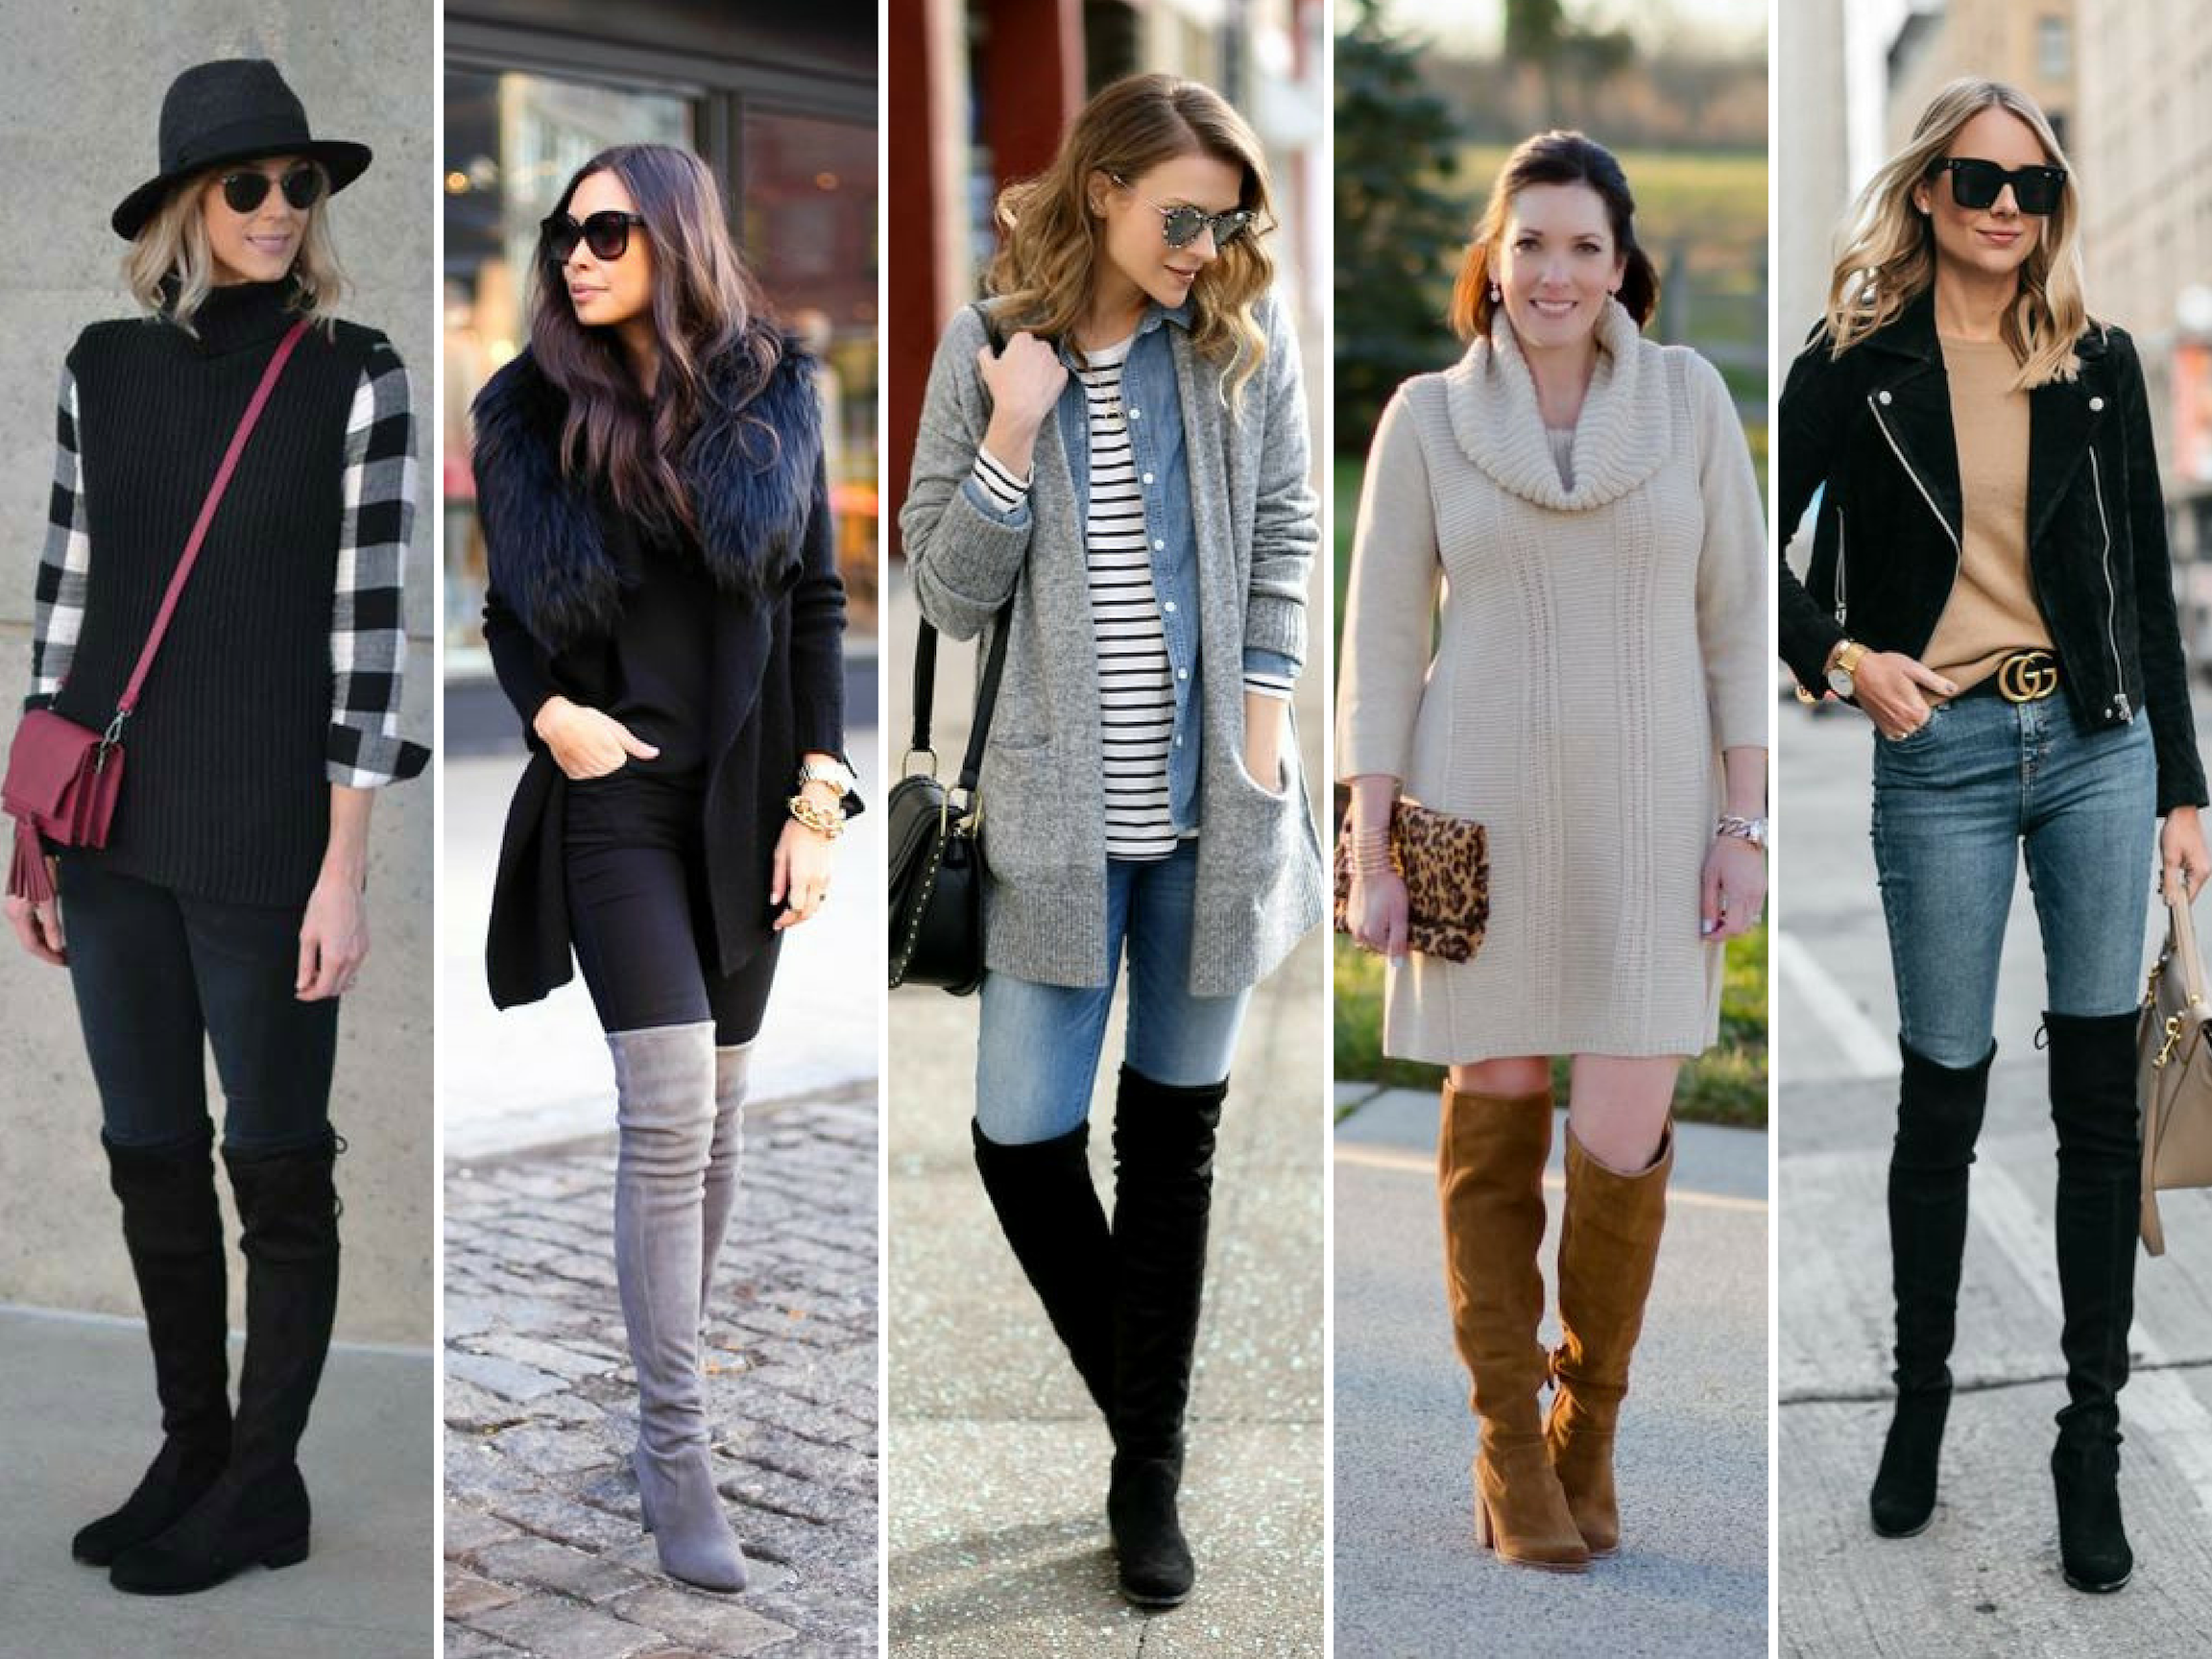 gray over the knee boot